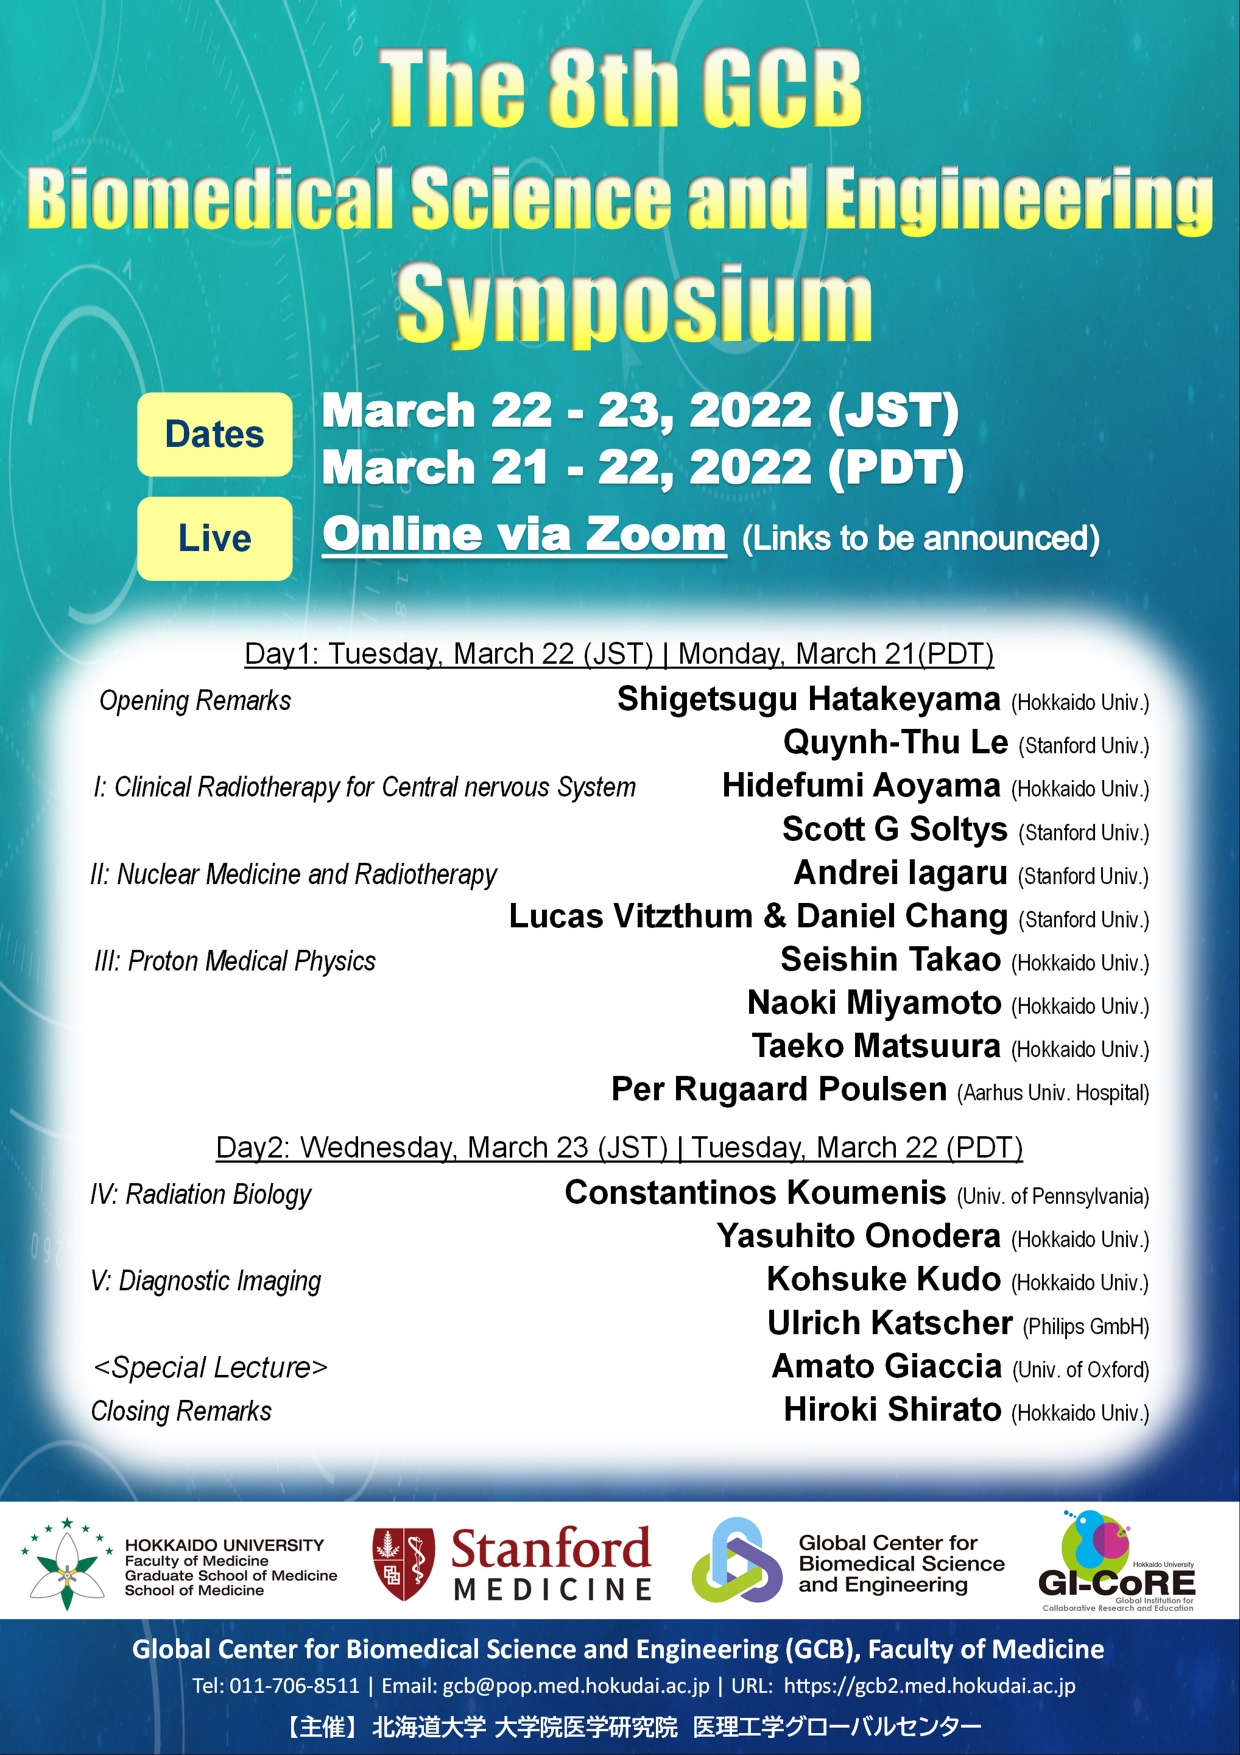 The 8th GCB Biomedical Science and Engineering Symposium March 21-22, 2022 (PDT)